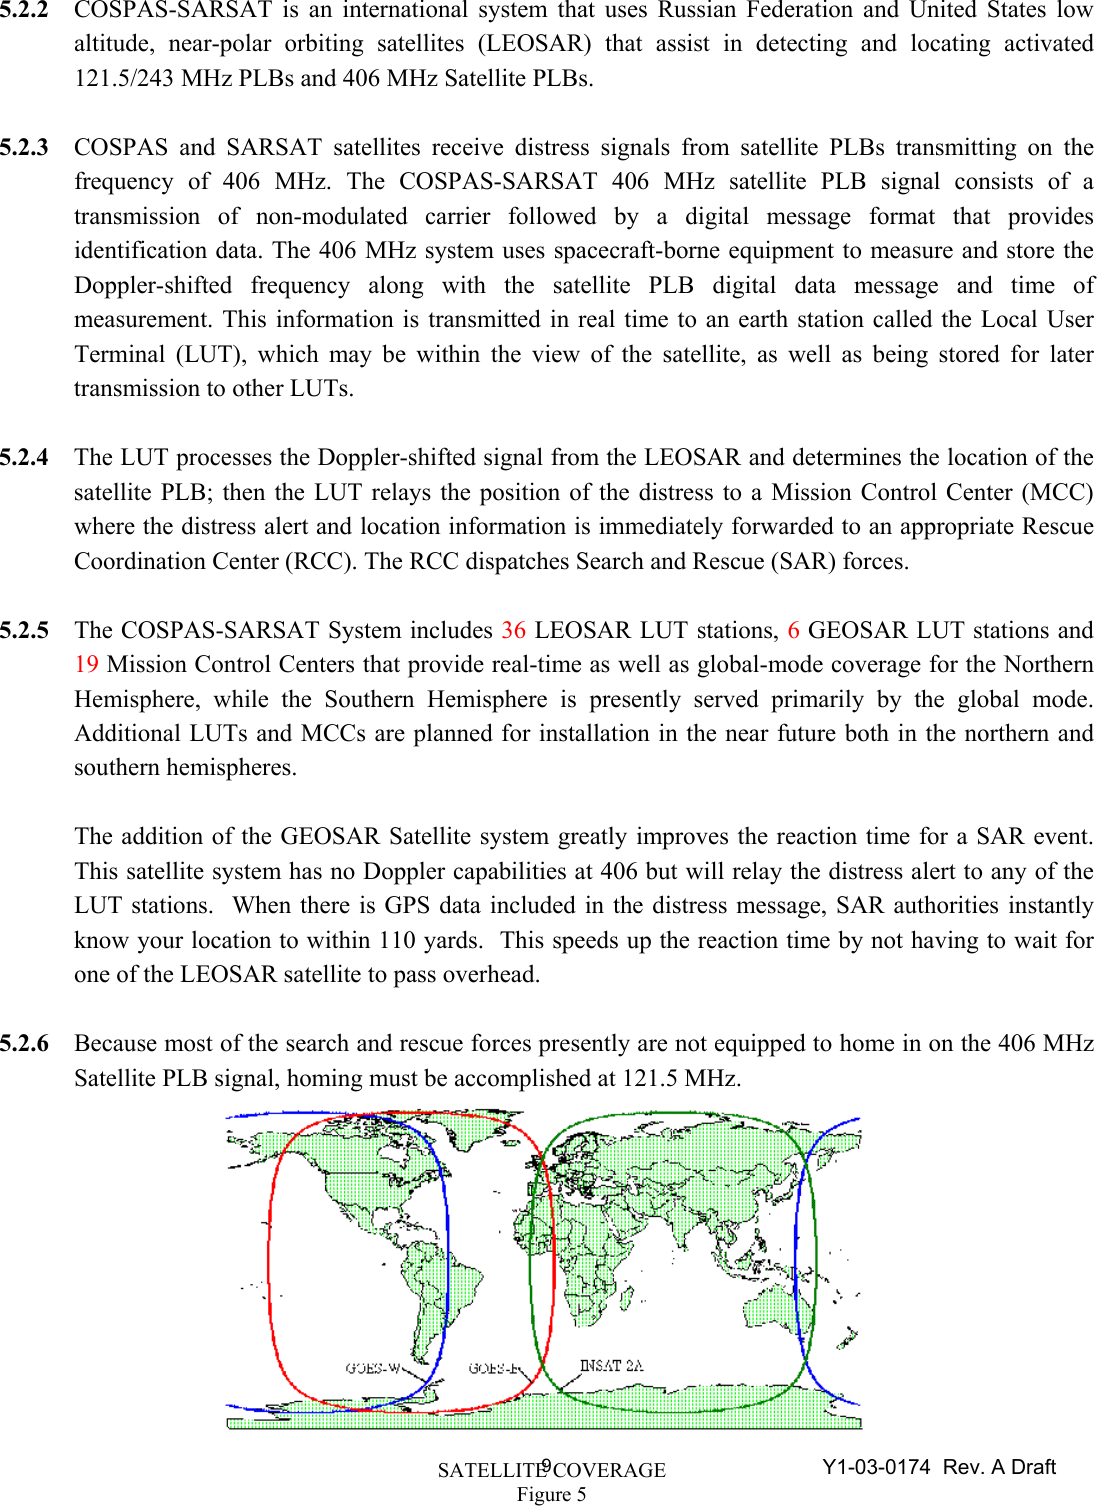 Y1-03-0174  Rev. A Draft 95.2.2  COSPAS-SARSAT is an international system that uses Russian Federation and United States low altitude, near-polar orbiting satellites (LEOSAR) that assist in detecting and locating activated 121.5/243 MHz PLBs and 406 MHz Satellite PLBs.   5.2.3  COSPAS and SARSAT satellites receive distress signals from satellite PLBs transmitting on the frequency of 406 MHz. The COSPAS-SARSAT 406 MHz satellite PLB signal consists of a transmission of non-modulated carrier followed by a digital message format that provides identification data. The 406 MHz system uses spacecraft-borne equipment to measure and store the Doppler-shifted frequency along with the satellite PLB digital data message and time of measurement. This information is transmitted in real time to an earth station called the Local User Terminal (LUT), which may be within the view of the satellite, as well as being stored for later transmission to other LUTs.  5.2.4  The LUT processes the Doppler-shifted signal from the LEOSAR and determines the location of the satellite PLB; then the LUT relays the position of the distress to a Mission Control Center (MCC) where the distress alert and location information is immediately forwarded to an appropriate Rescue Coordination Center (RCC). The RCC dispatches Search and Rescue (SAR) forces.  5.2.5  The COSPAS-SARSAT System includes 36 LEOSAR LUT stations, 6 GEOSAR LUT stations and 19 Mission Control Centers that provide real-time as well as global-mode coverage for the Northern Hemisphere, while the Southern Hemisphere is presently served primarily by the global mode. Additional LUTs and MCCs are planned for installation in the near future both in the northern and southern hemispheres.    The addition of the GEOSAR Satellite system greatly improves the reaction time for a SAR event.  This satellite system has no Doppler capabilities at 406 but will relay the distress alert to any of the LUT stations.  When there is GPS data included in the distress message, SAR authorities instantly know your location to within 110 yards.  This speeds up the reaction time by not having to wait for one of the LEOSAR satellite to pass overhead.   5.2.6  Because most of the search and rescue forces presently are not equipped to home in on the 406 MHz Satellite PLB signal, homing must be accomplished at 121.5 MHz.           SATELLITE COVERAGE Figure 5 